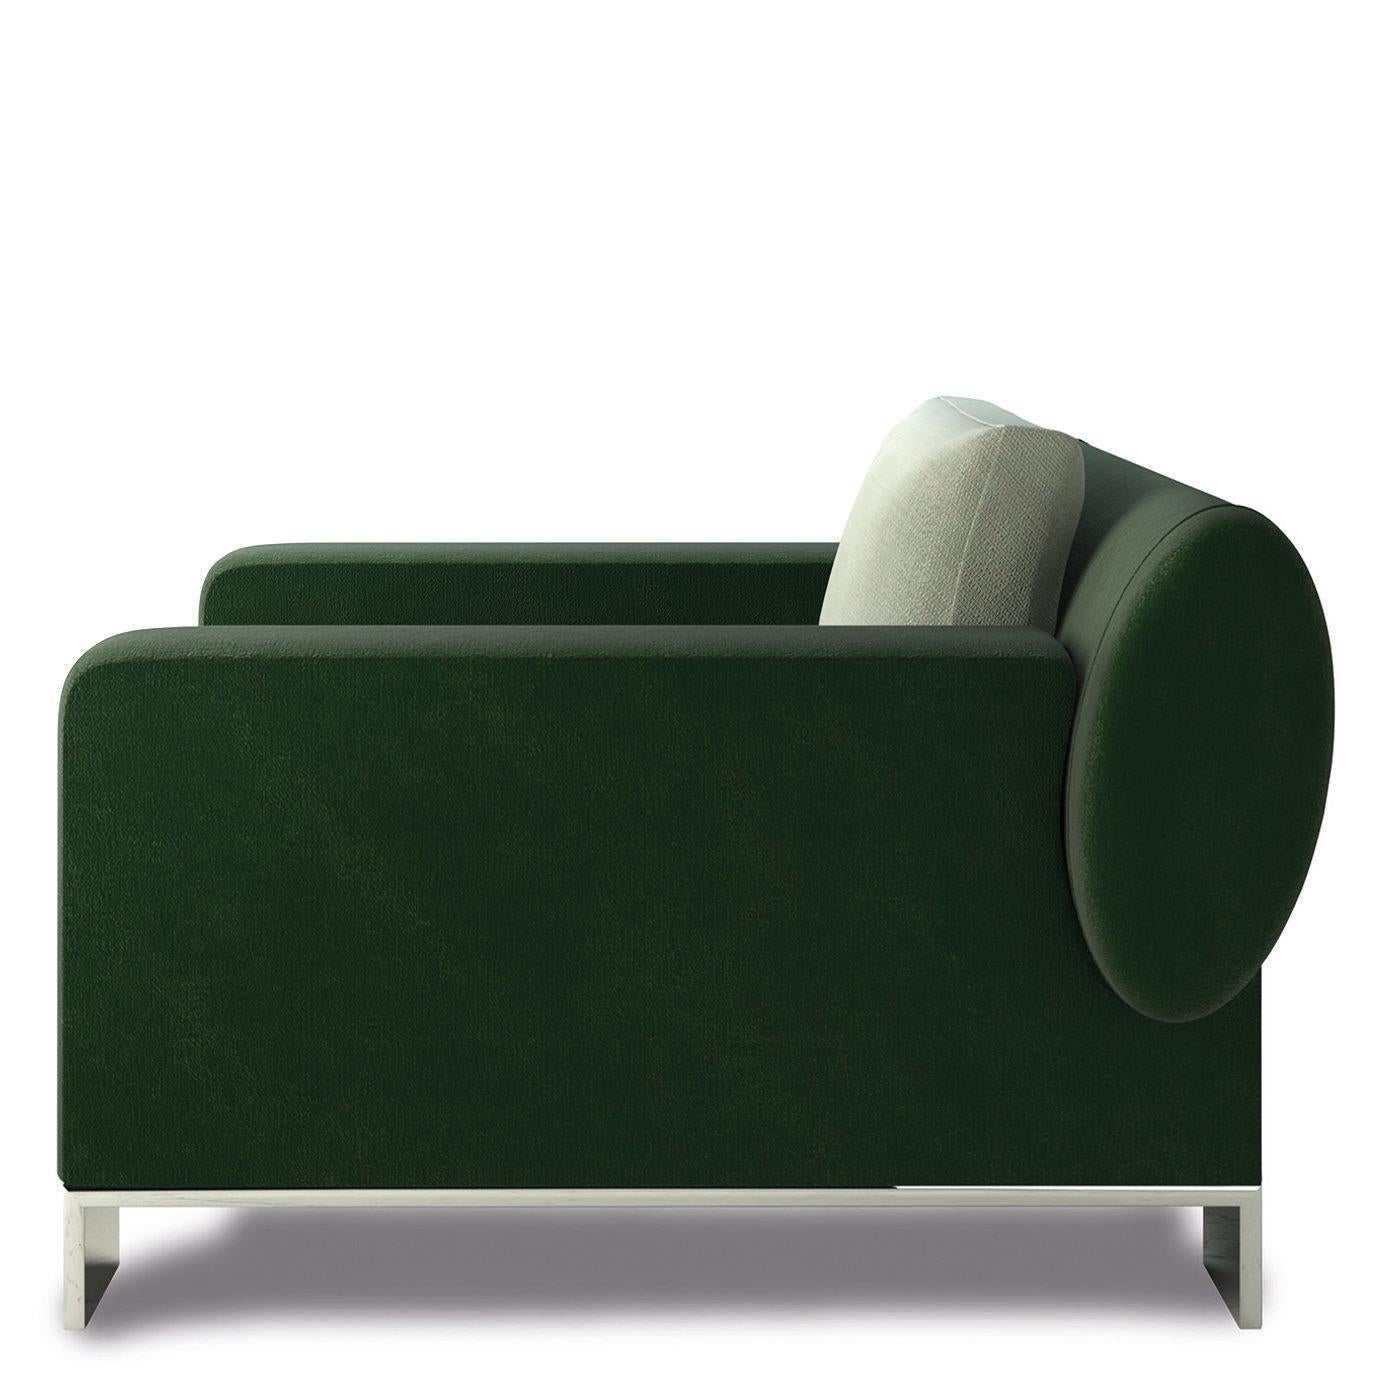 Exquisitely designed by Giannella Ventura for an elegant contemporary interior, this gorgeous armchair is named after abstract painter Jackson Pollock. Showcasing clean and essential lines that uniquely contrast the artist's expressionist